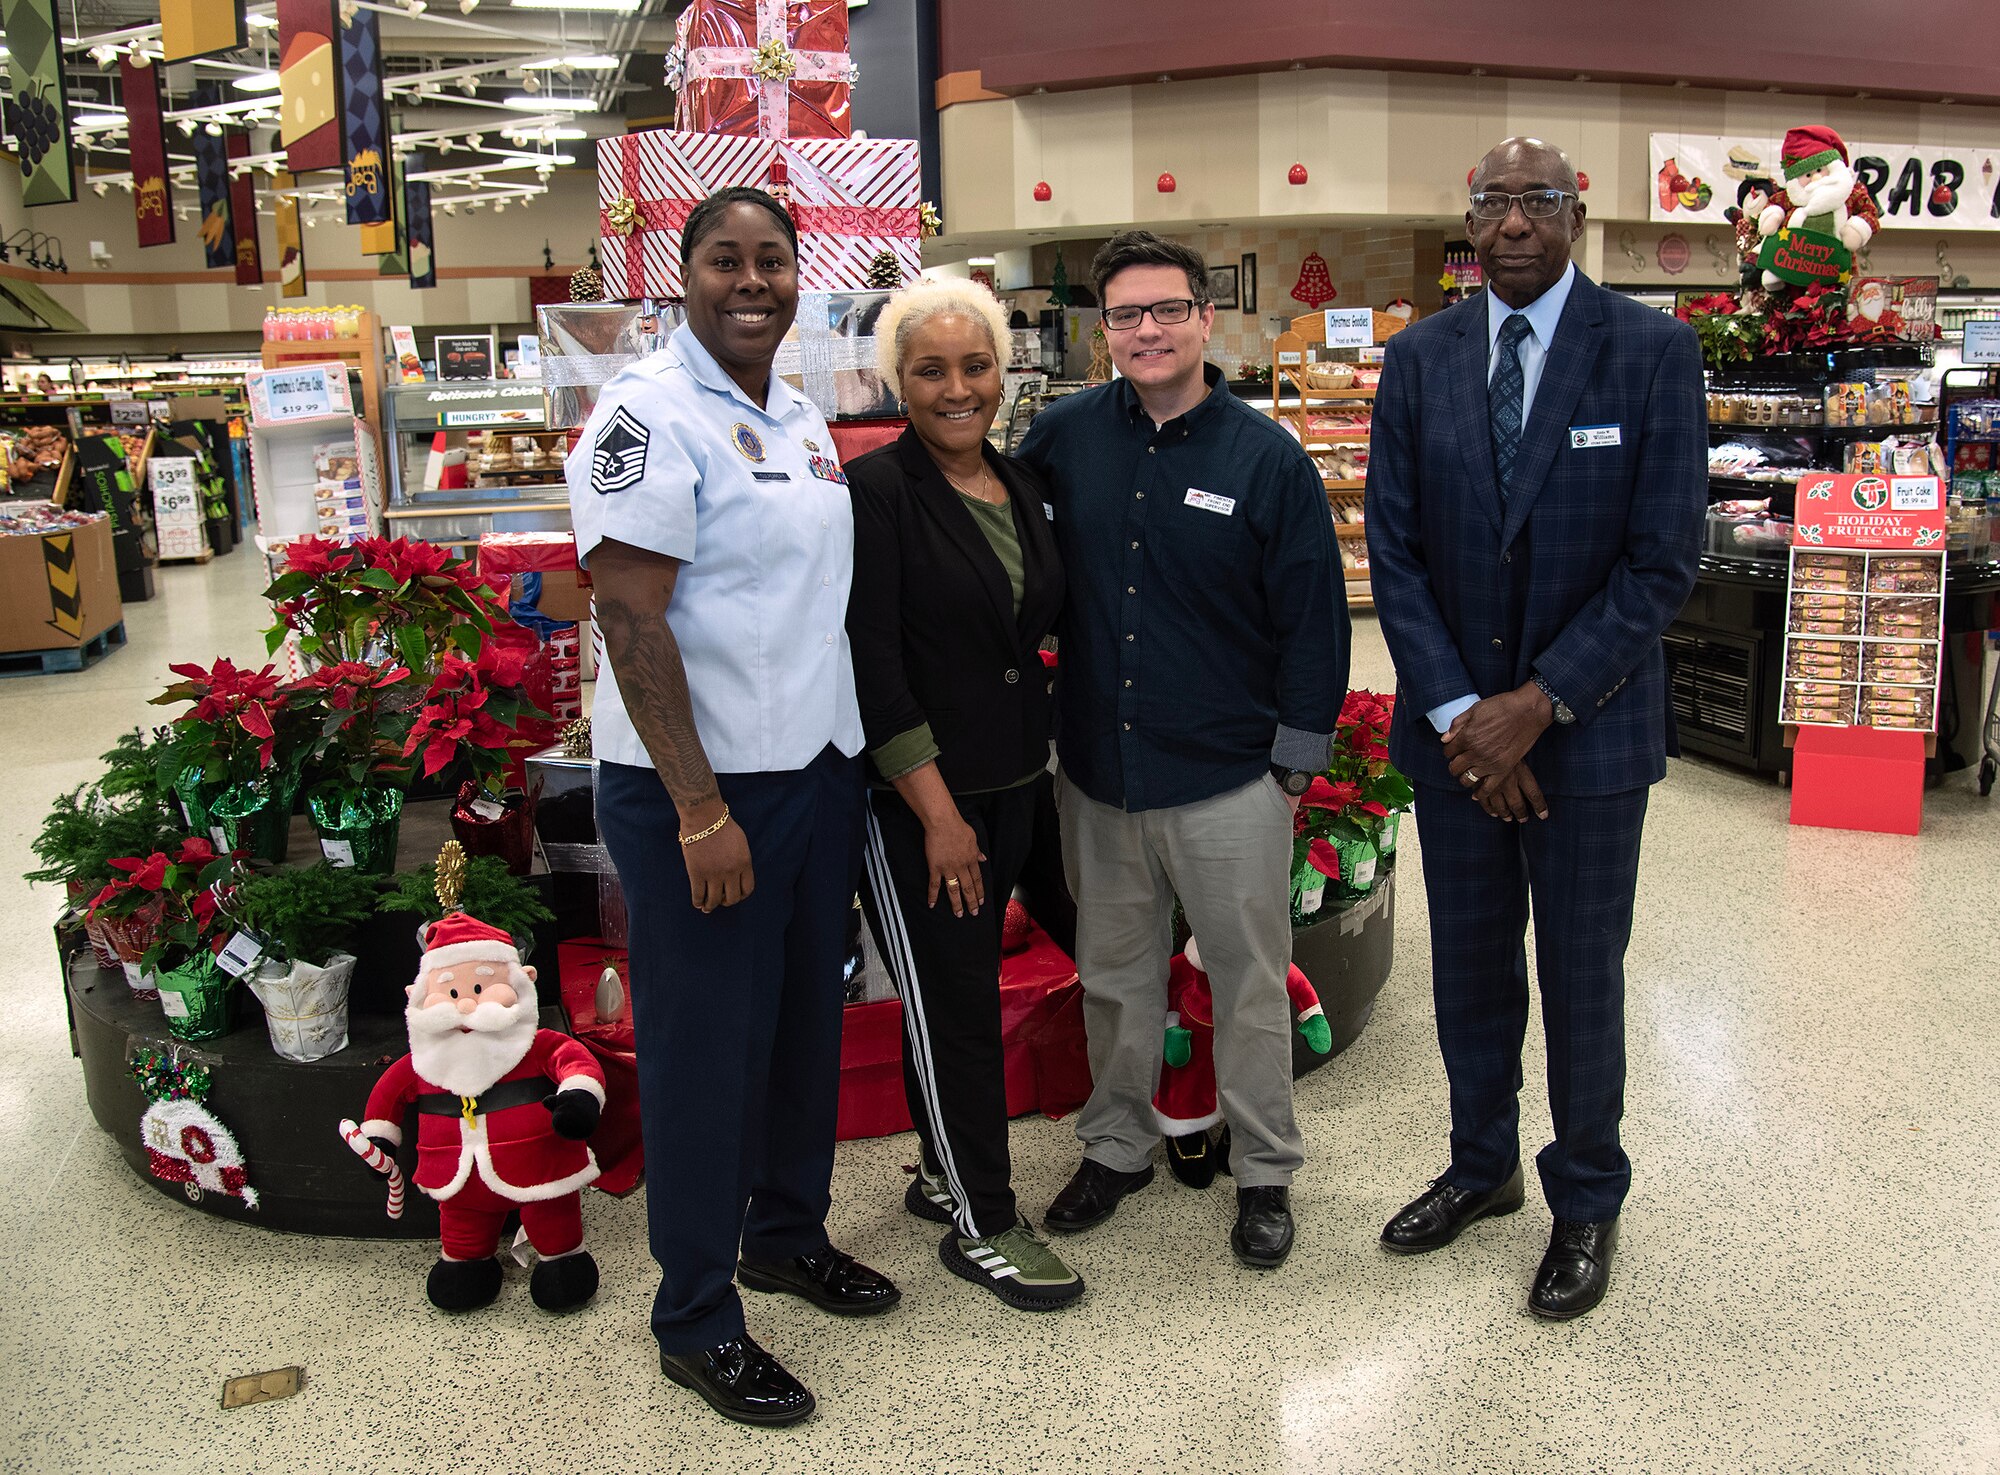 315 AW recruiters help spread holiday cheer at commissary